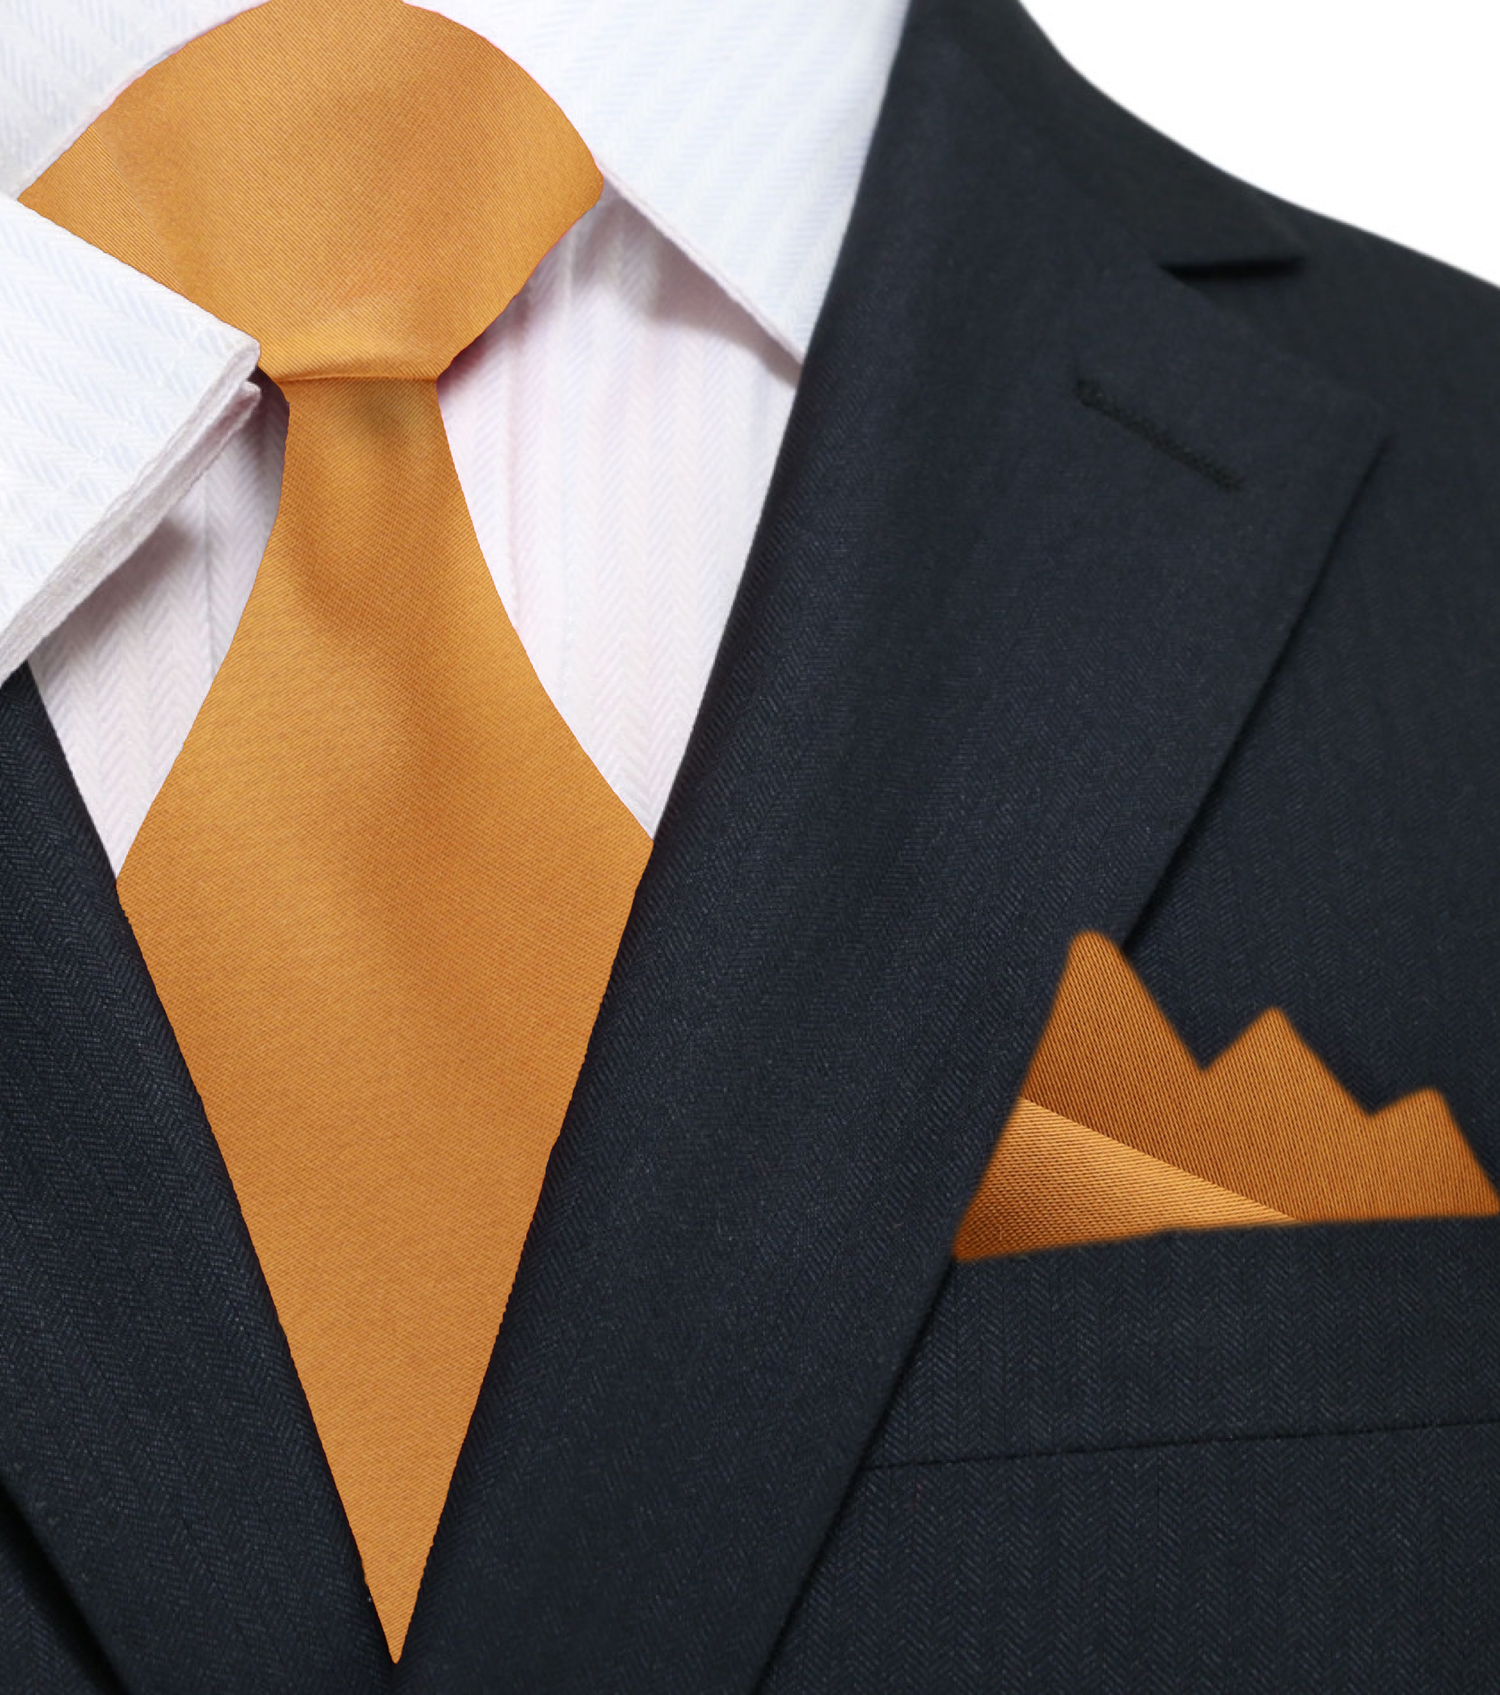 Main View: Marigold Necktie with Matching Square